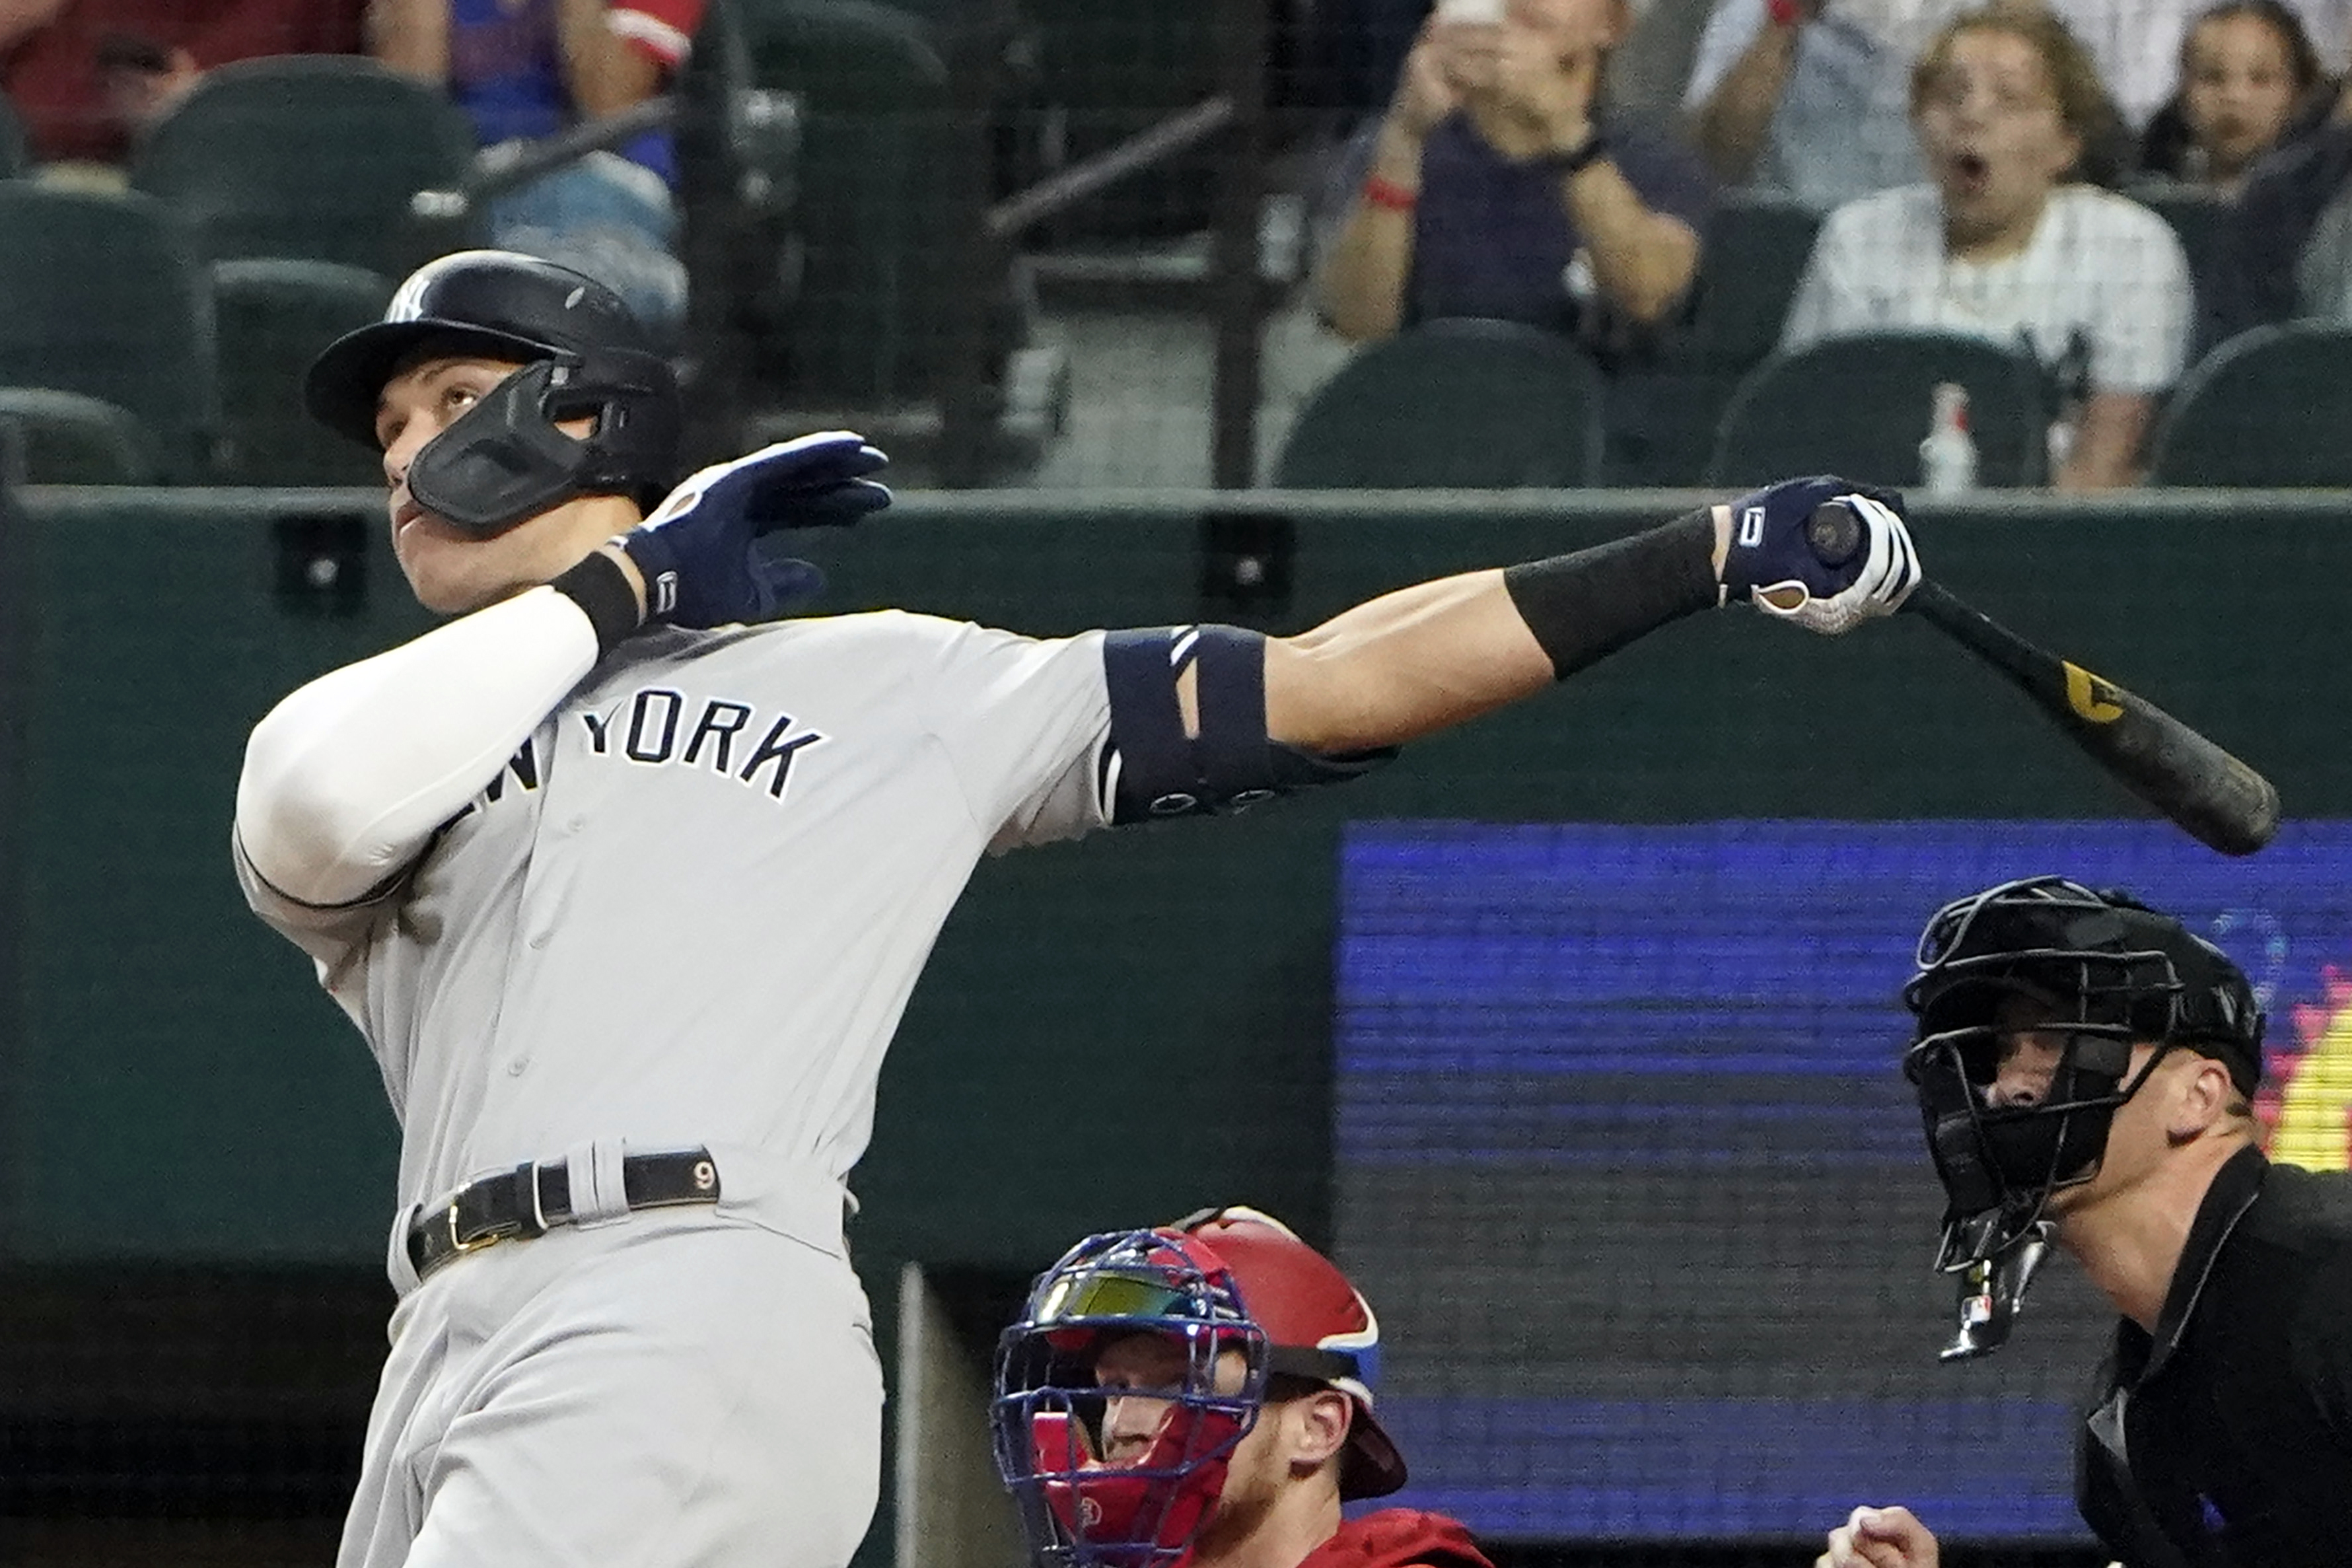 Aaron Judge HR video: Watch Yankees slugger go yard in first AB of 2023 -  DraftKings Network